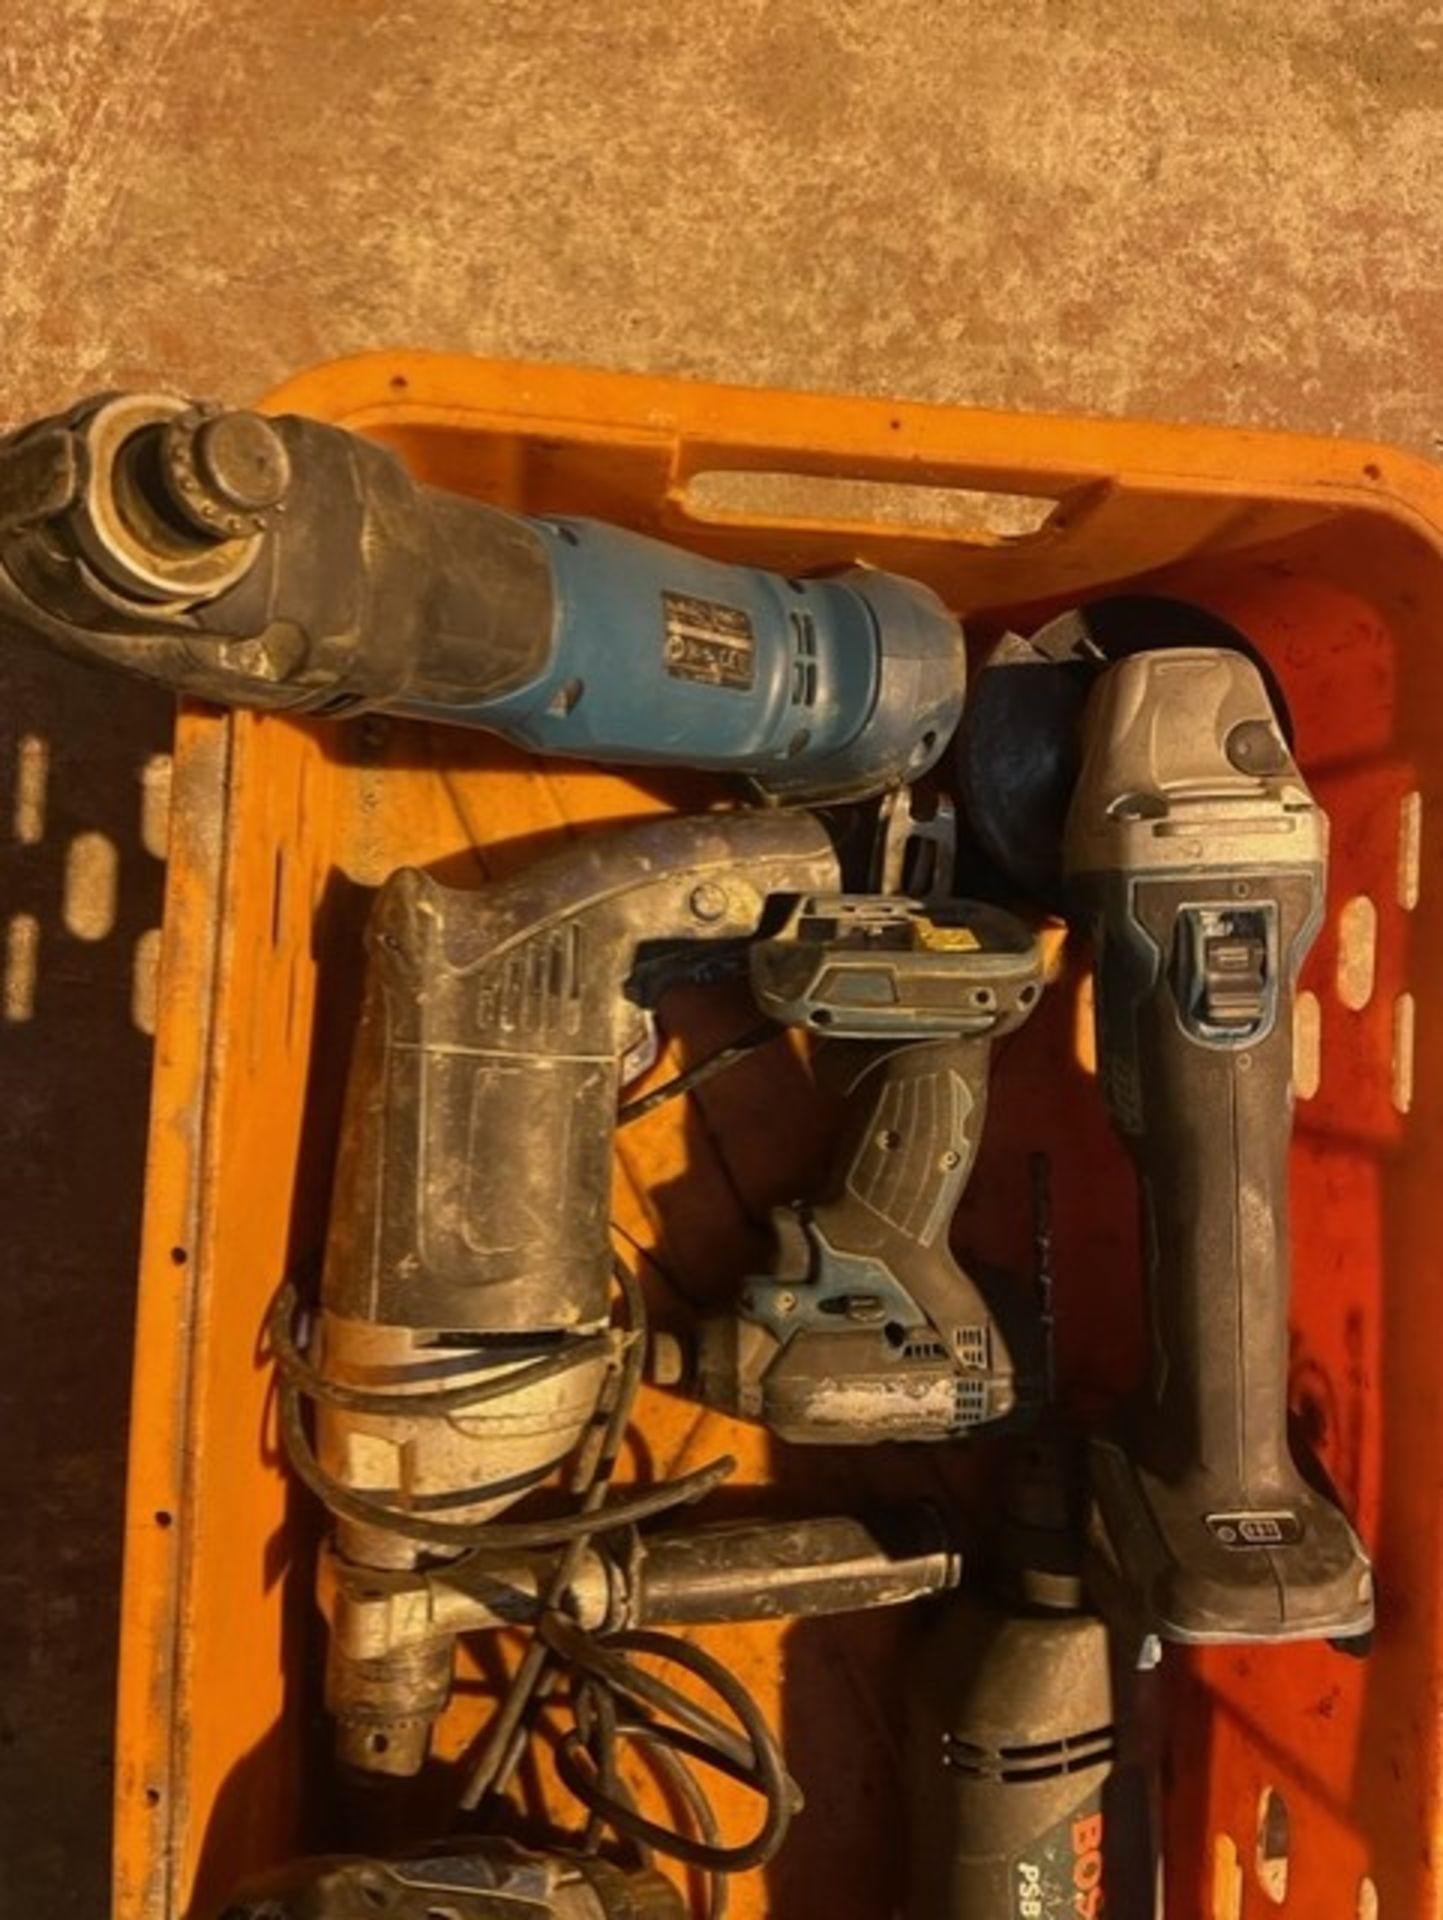 Makita drill impact multi grinder and circular saw Bosch drill and another drill